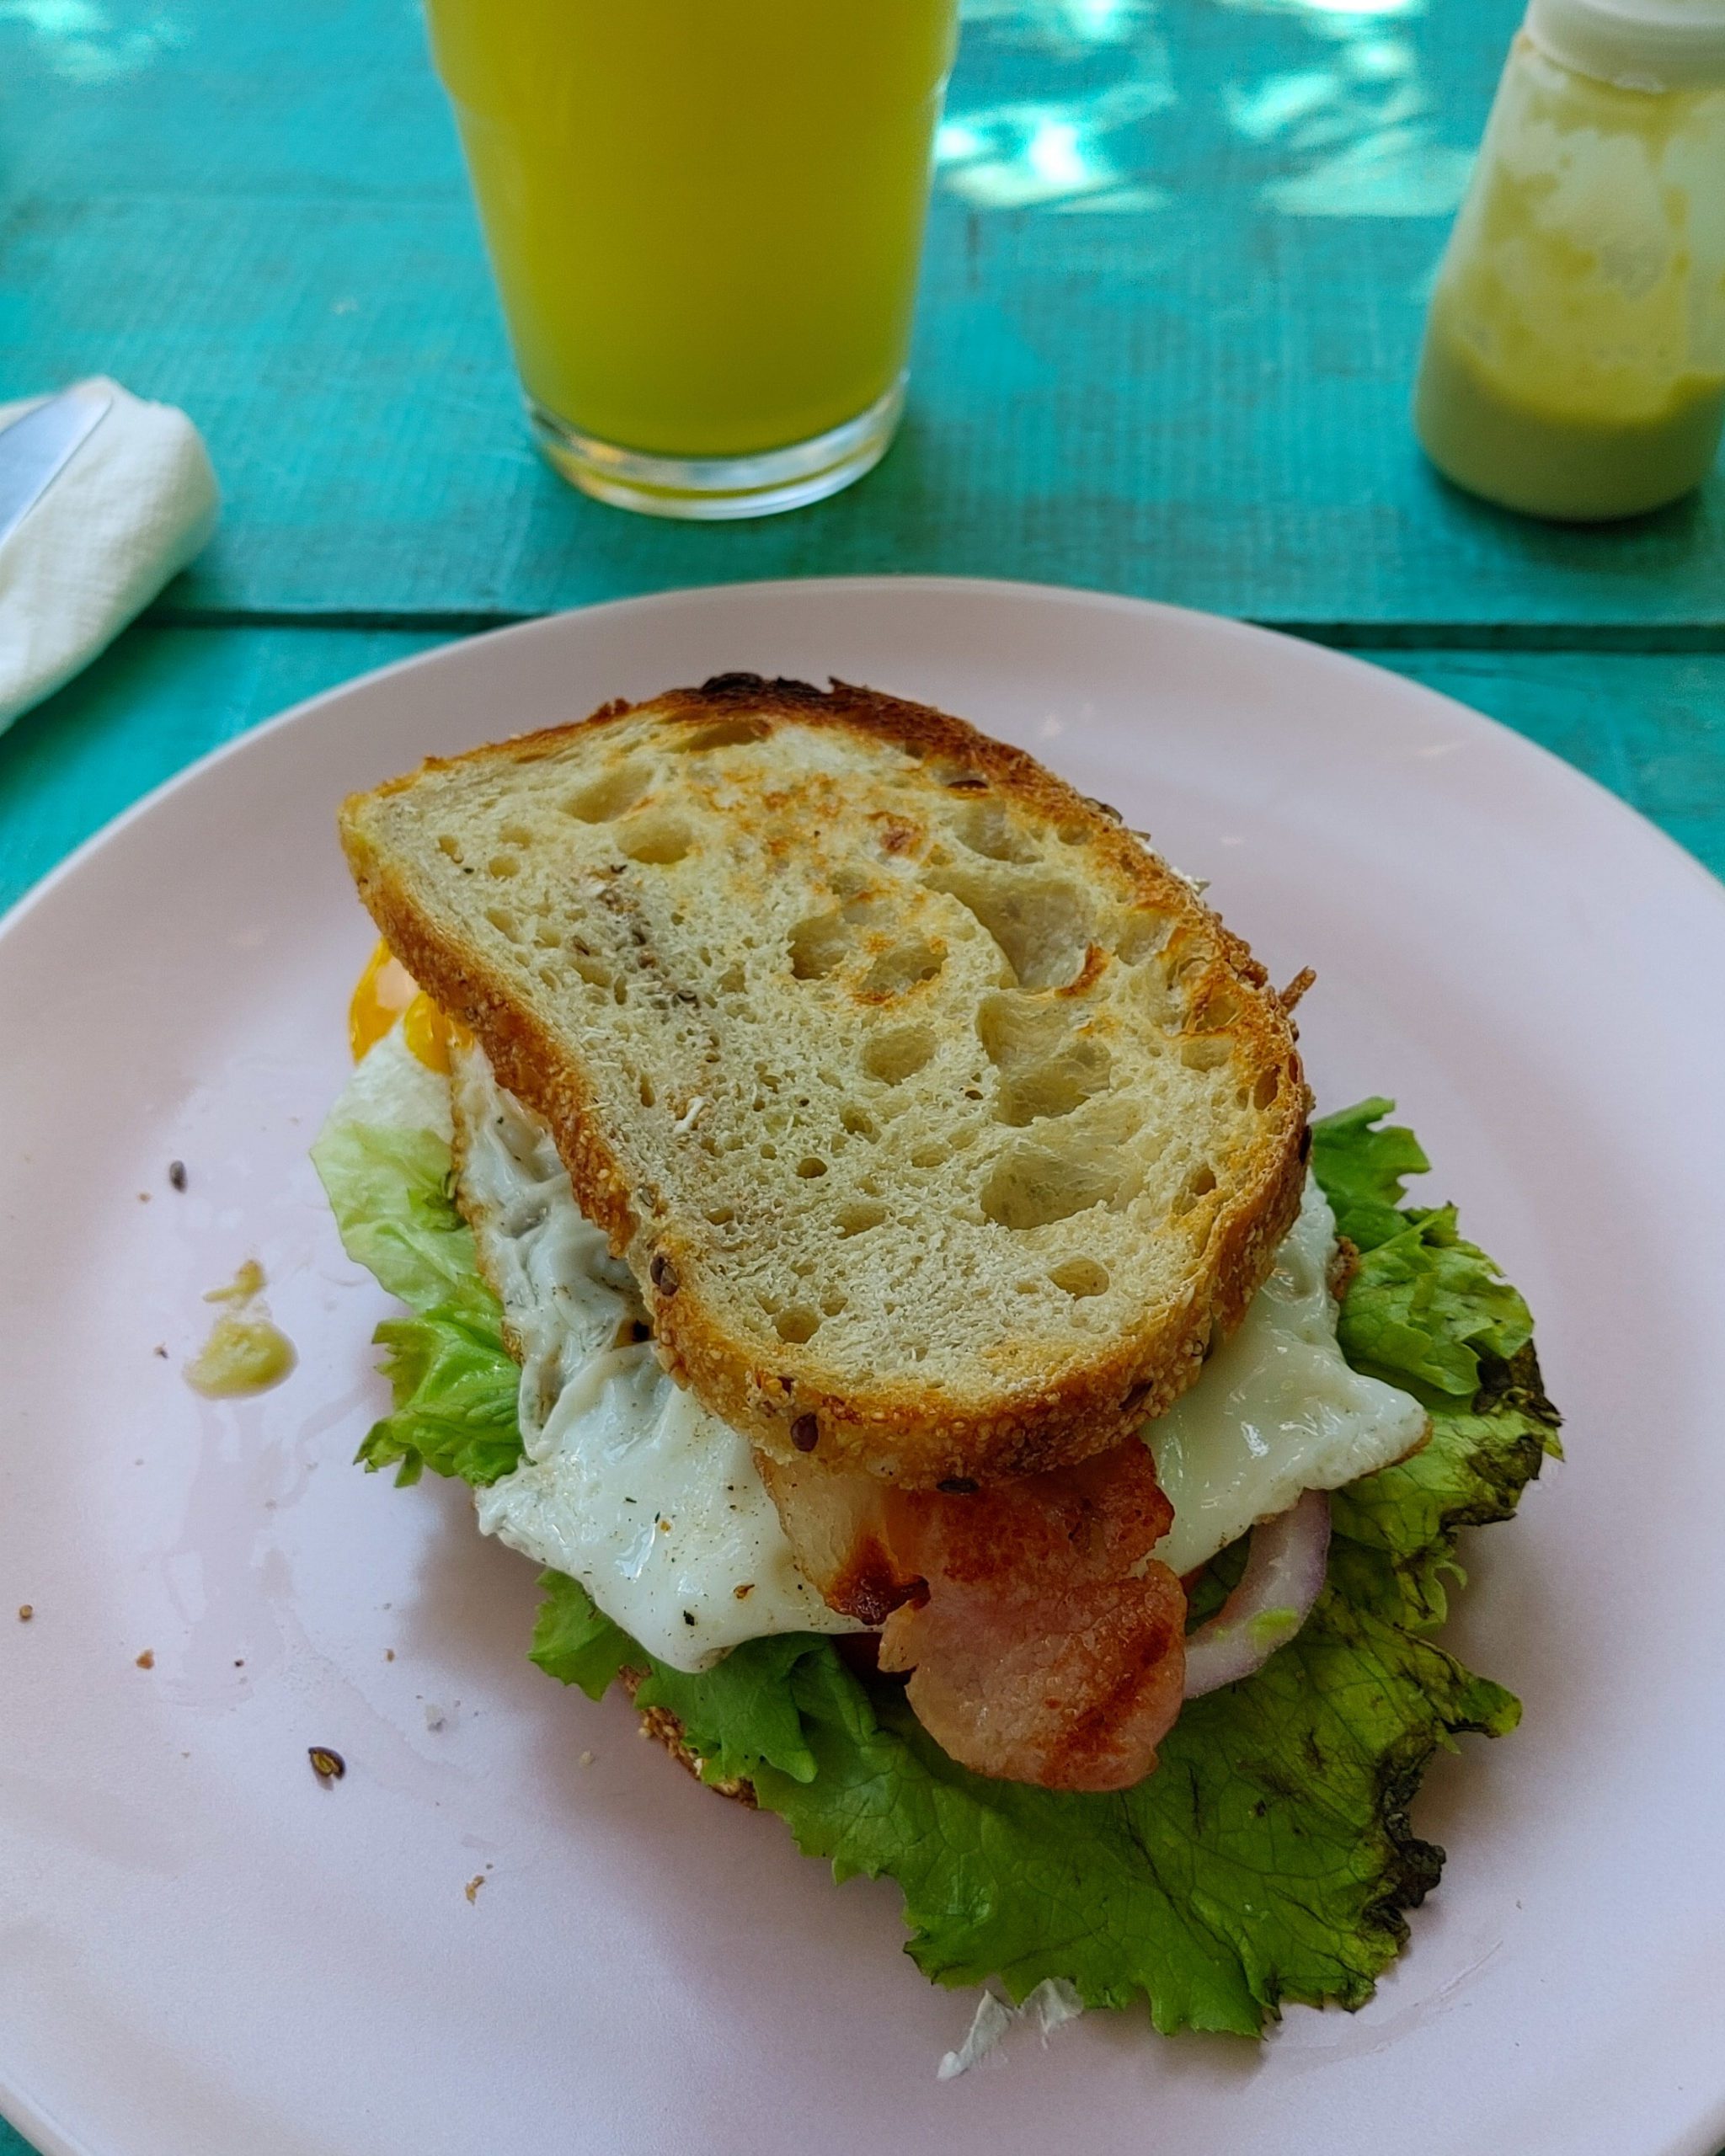 BLT at El Manati, where to eat in Bacalar